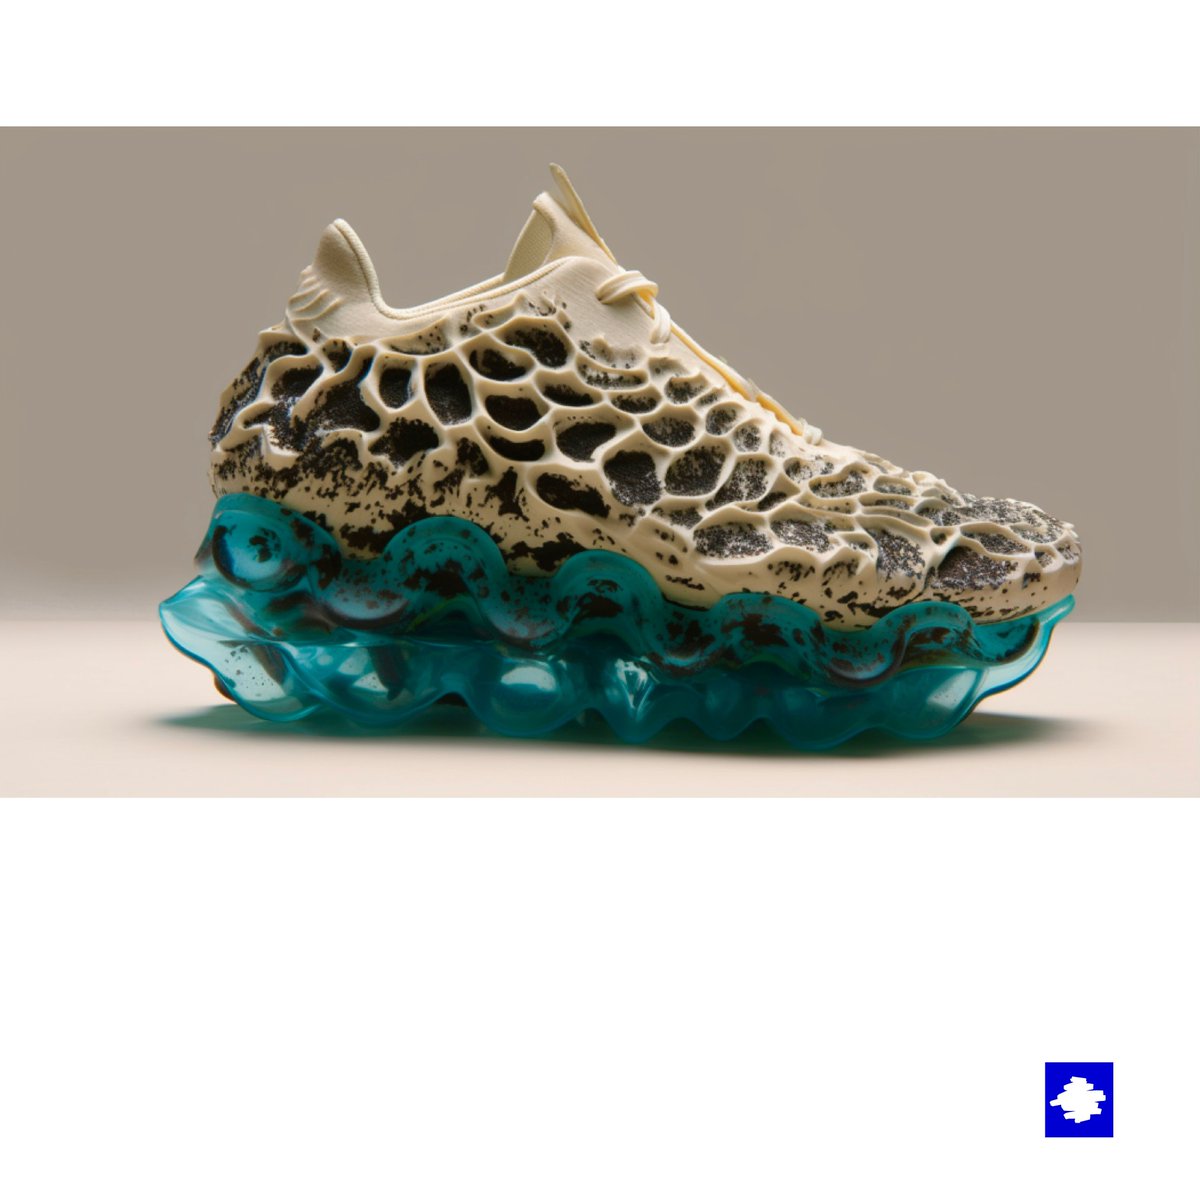 Trametes Versicolor Shoe “TURQUOISE'

Derived Turkey Tail Fungus as a typology

Reference: Nike Air Max Scorpion Flyknit 

#bluewatercolorsamurai #bluedesigns #shoedesign #nike #mushroom #aidesign #midjourneyv5 #v5 #architecturaldesign #arts #nft #fashion #nftart #creative